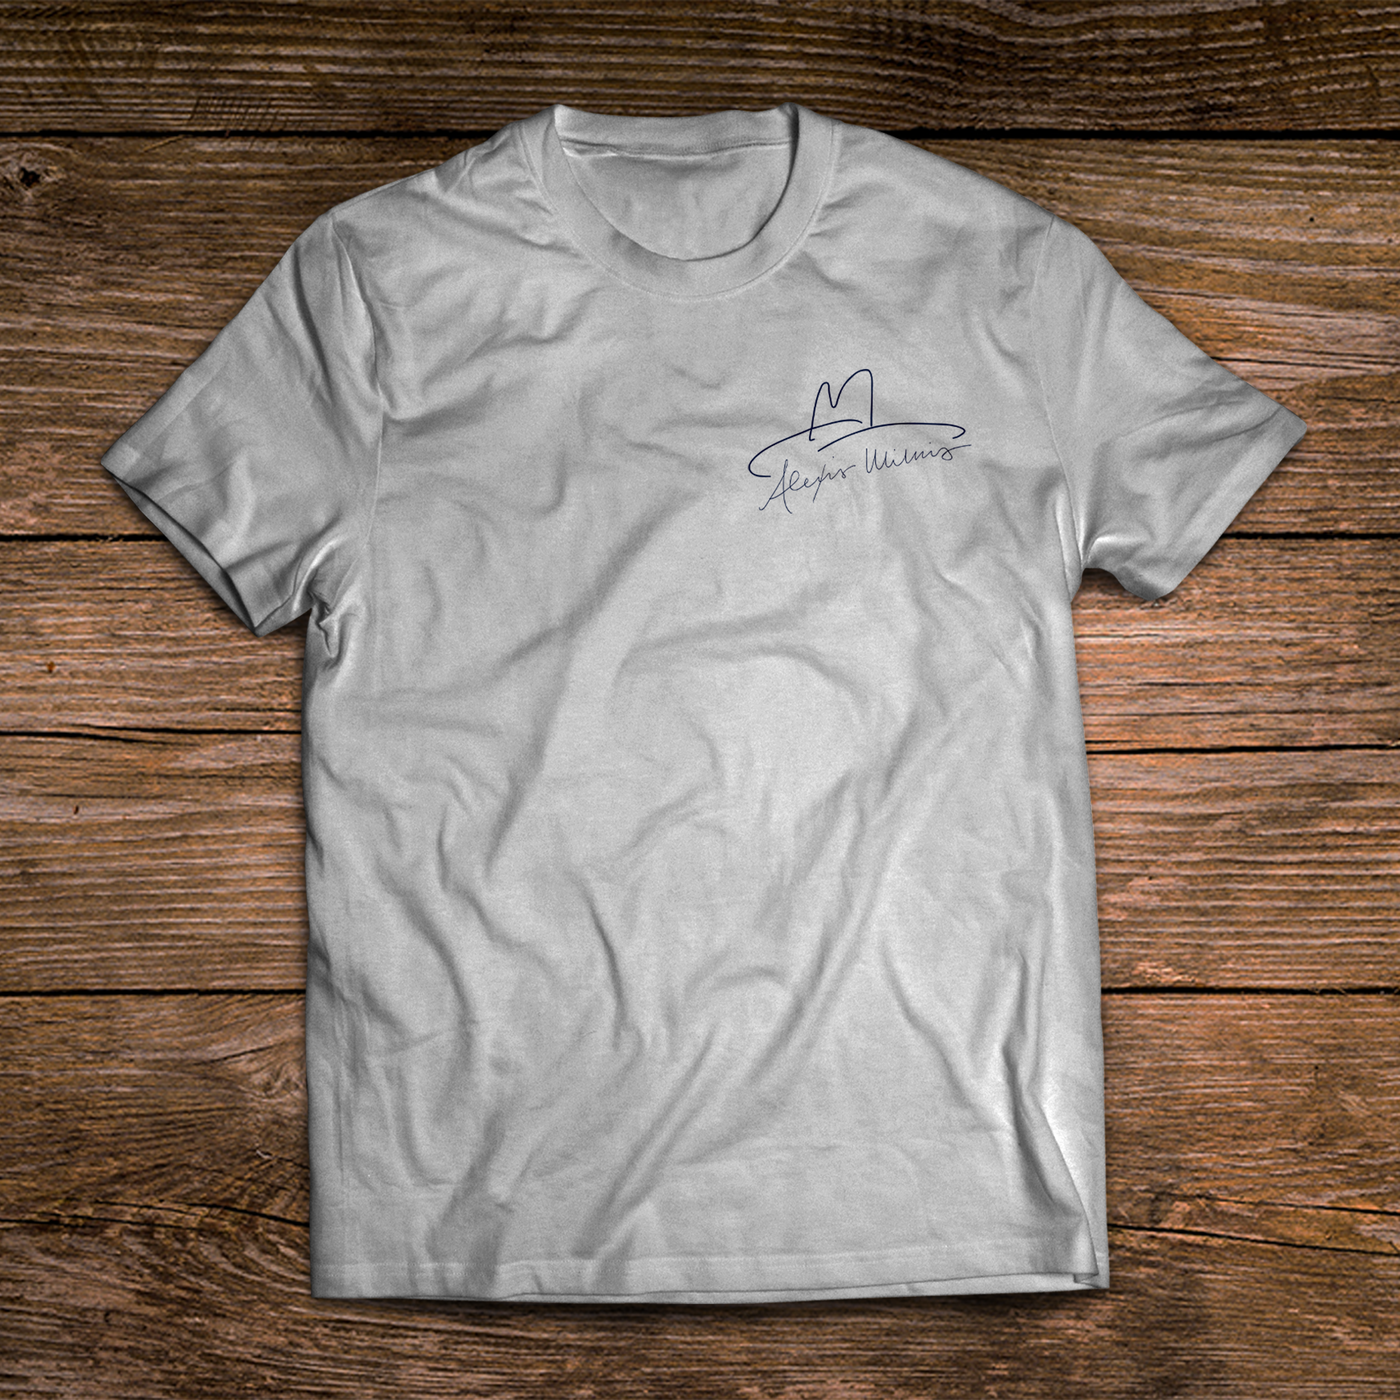 COUNTRY BACK Short Sleeve T-Shirt, Grey - Alexis Wilkins Official Merchandise